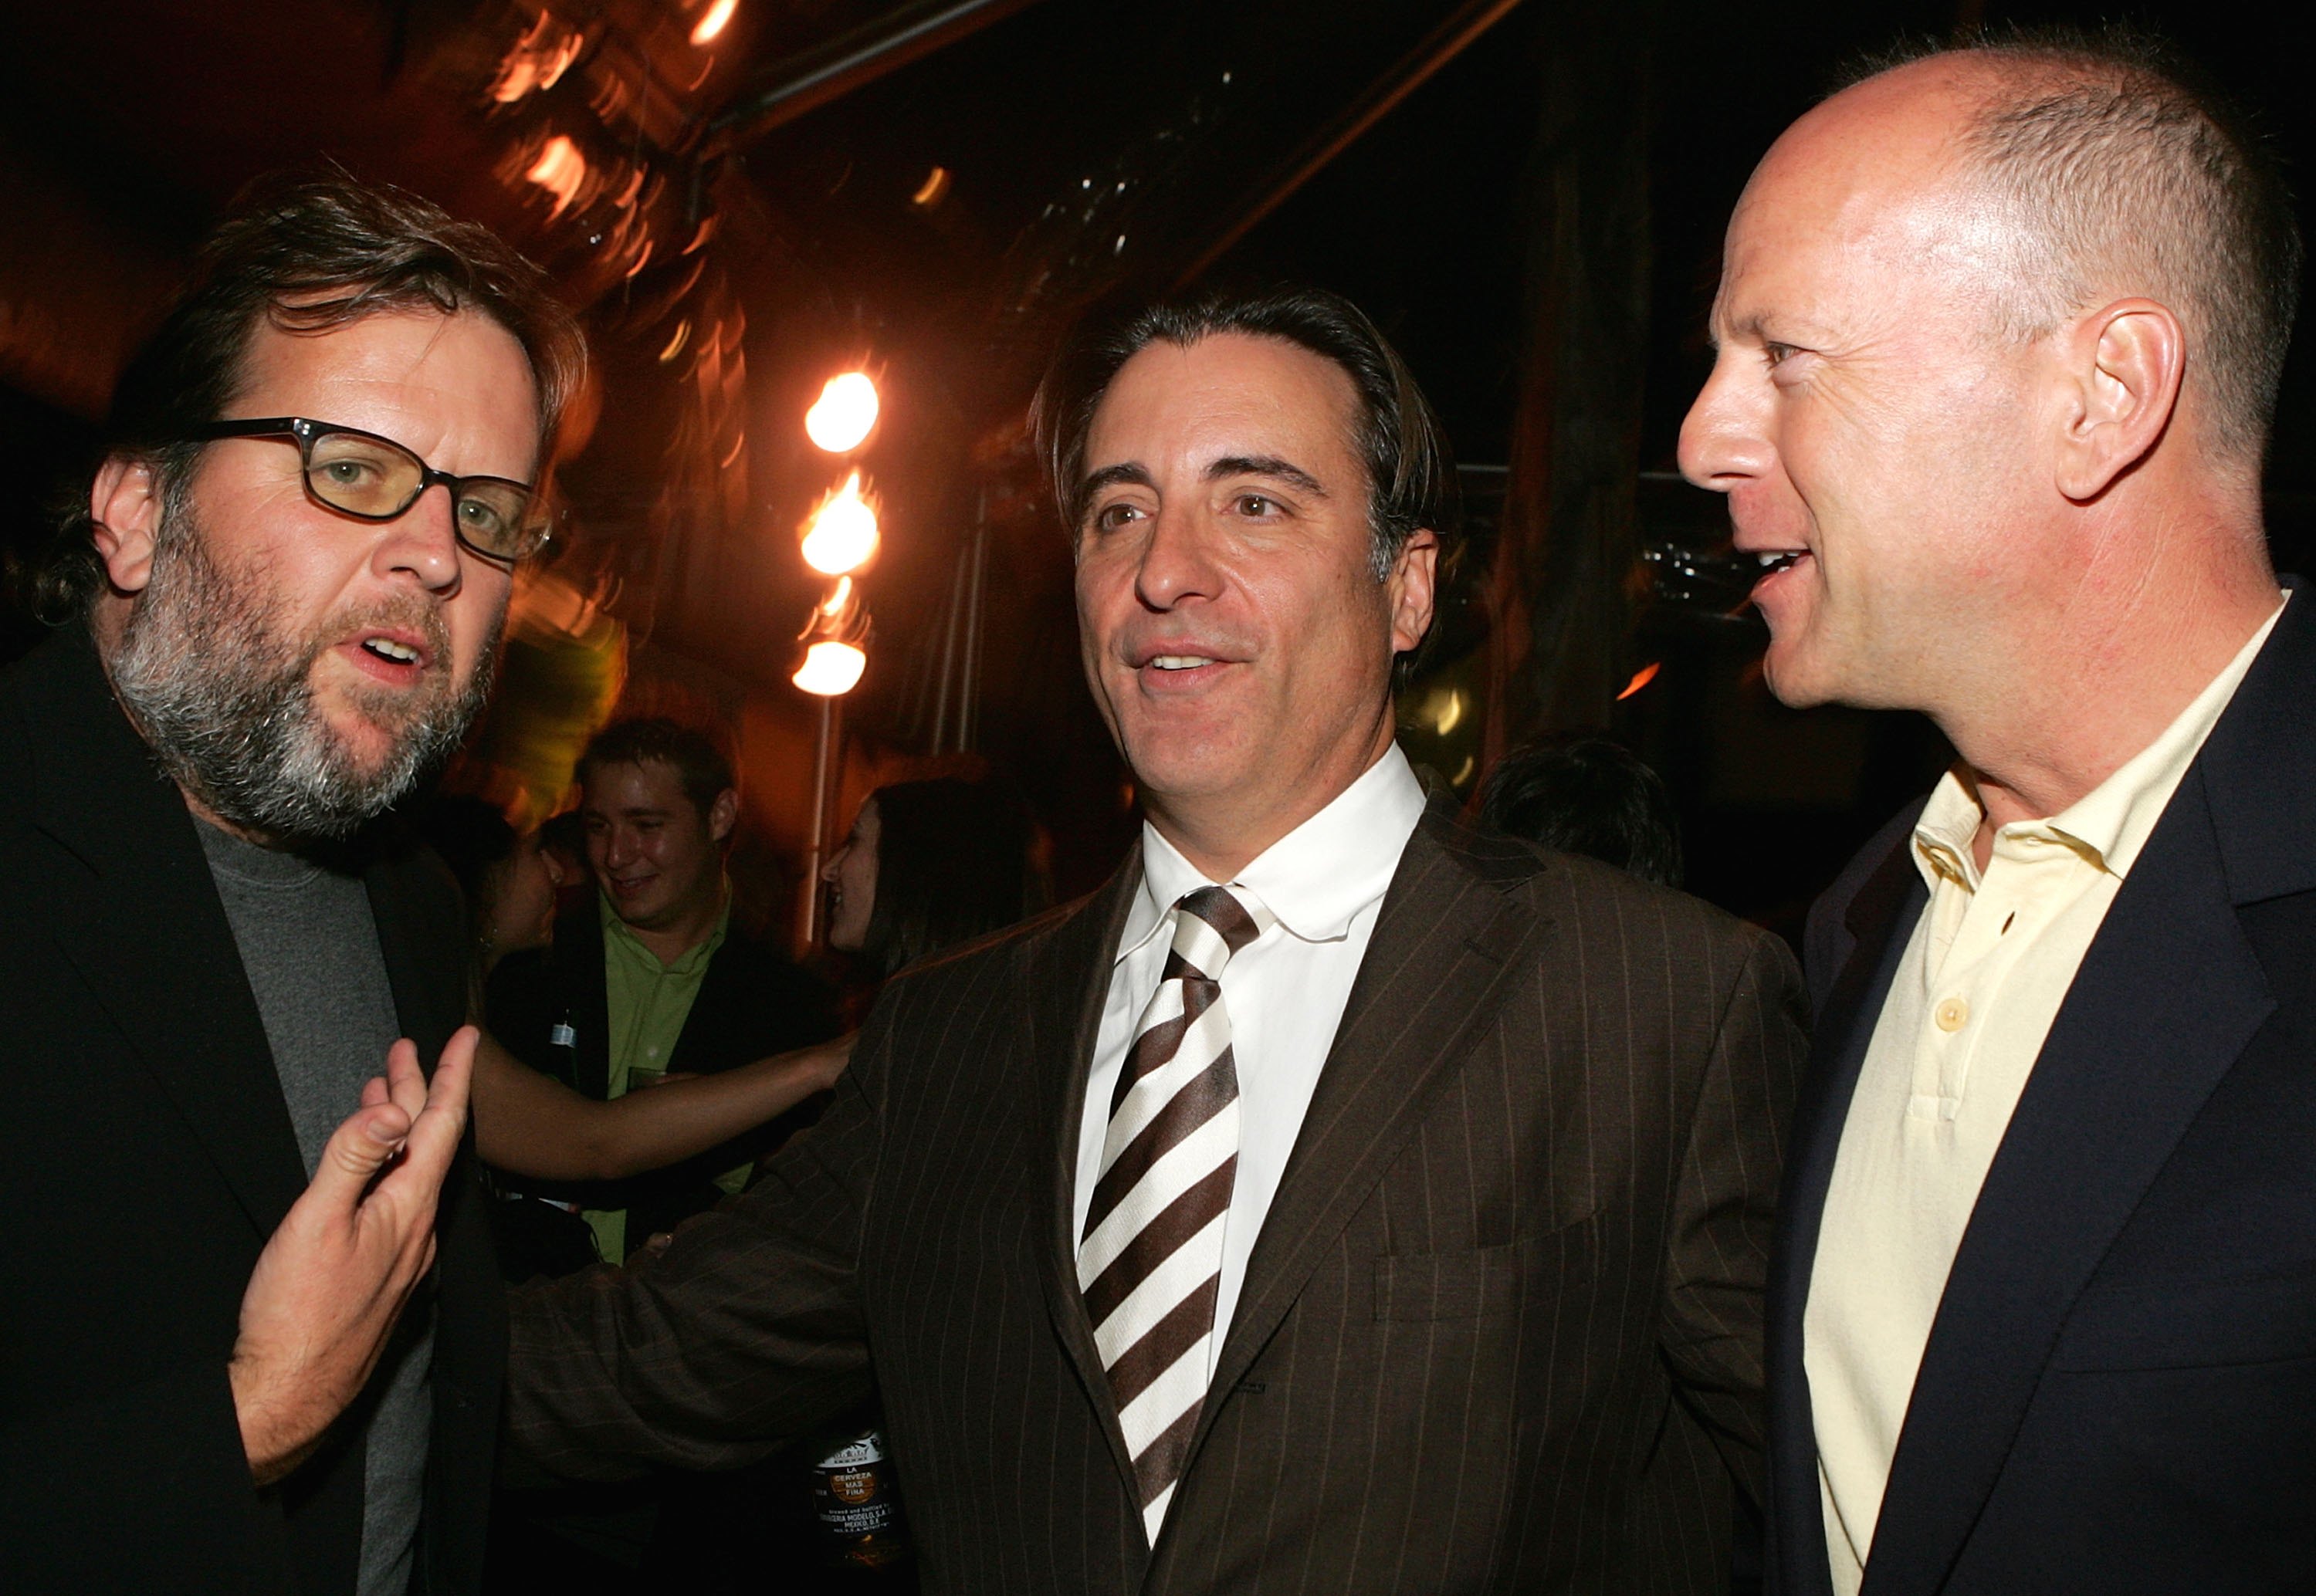 David Willis, Andy Garcia and Bruce Willis attend the after party to the premiere of "The Lost City" April 17, 2006, in Hollywood, California. | Source: Getty Images